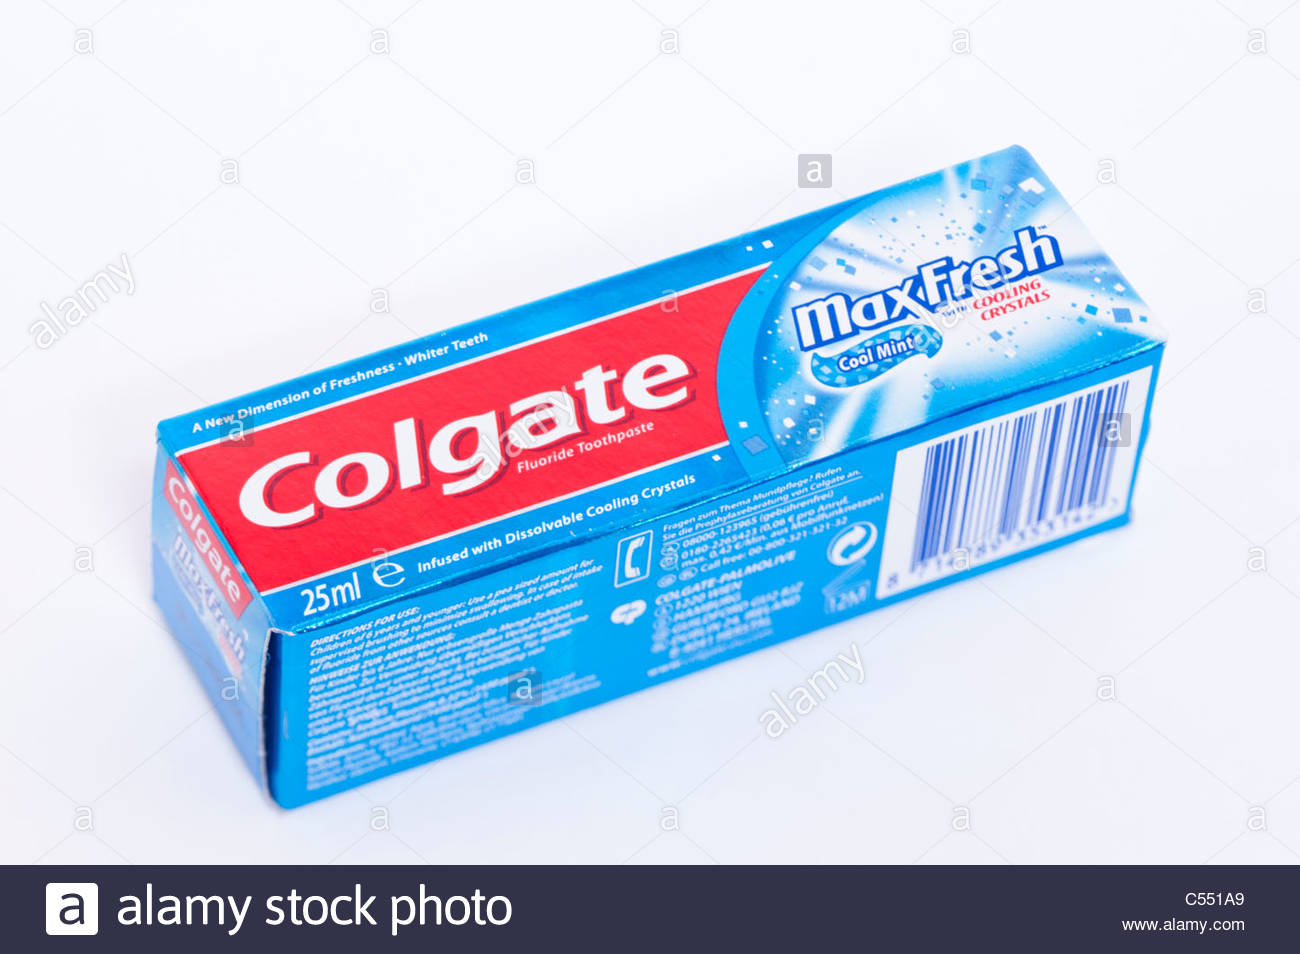 A Pack Of Colgate Maxfresh Cool Mint Toothpaste On White